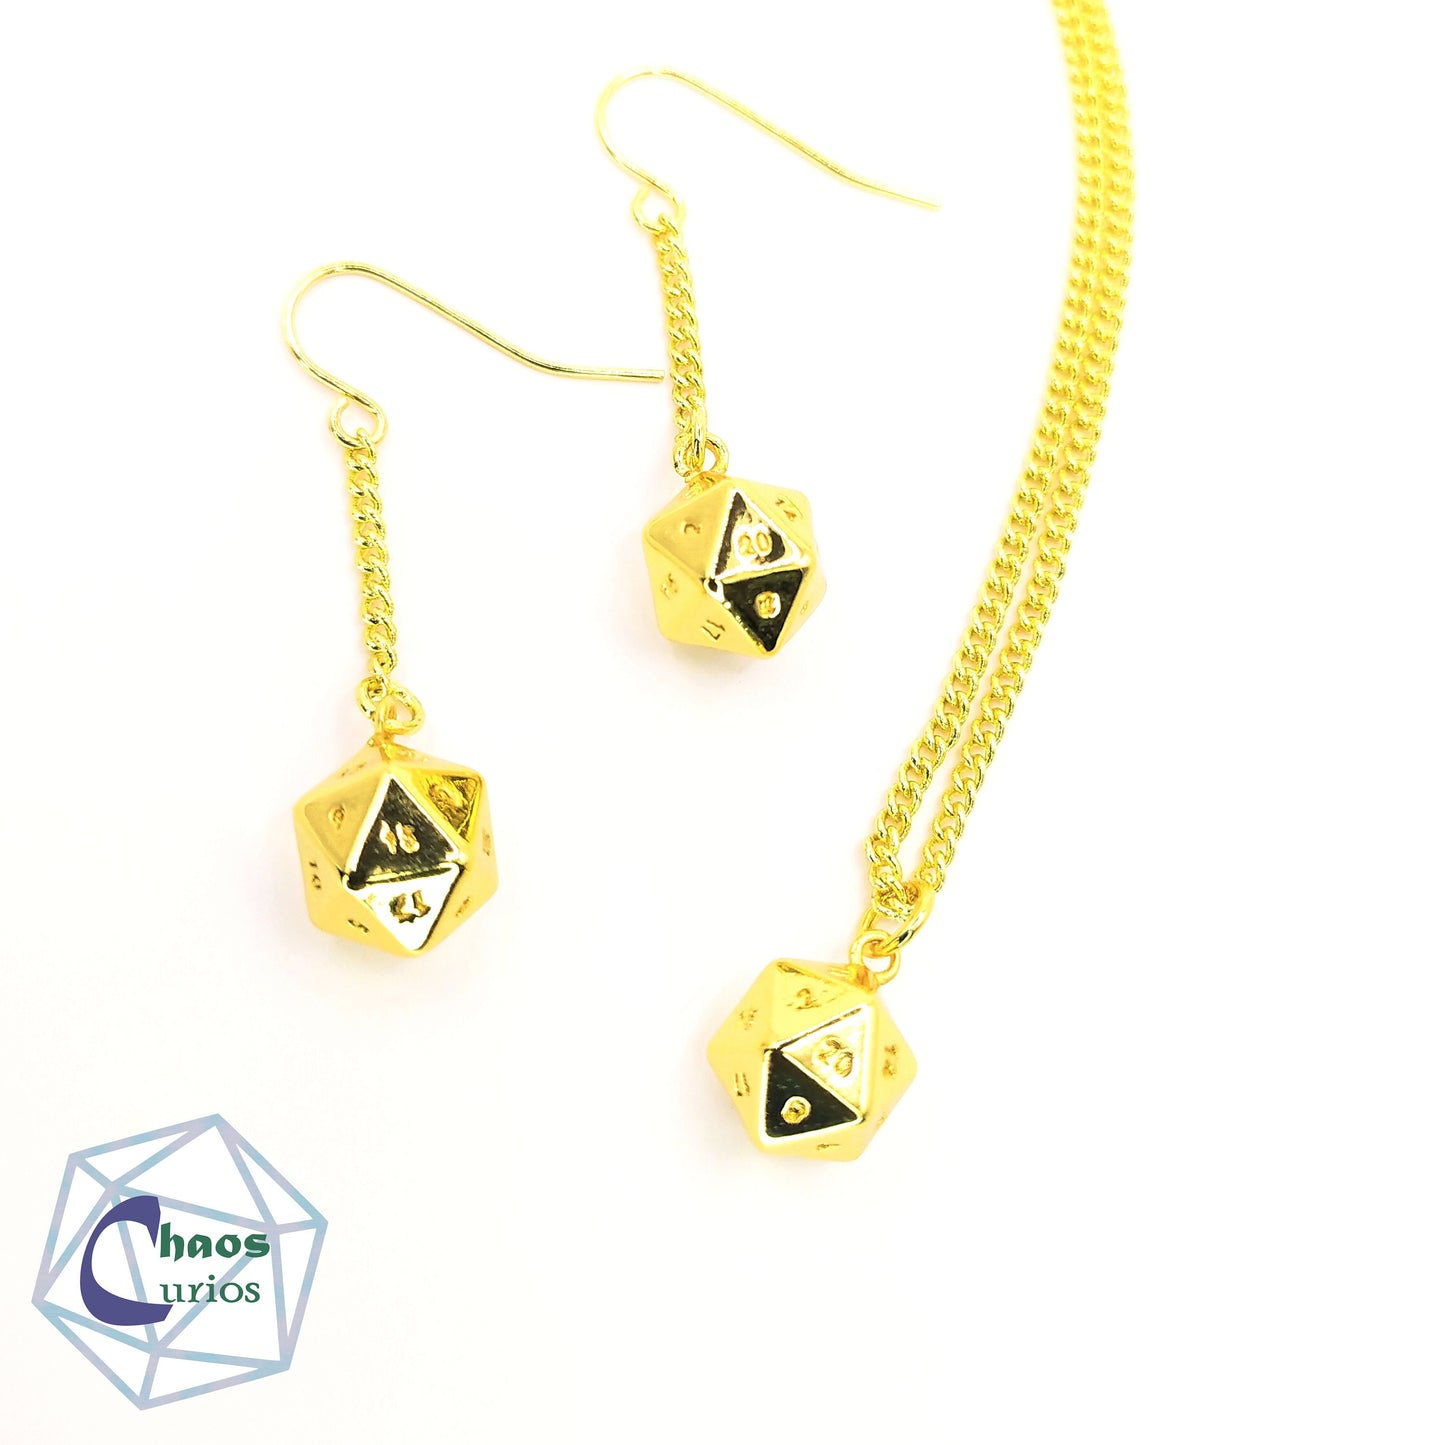 D20 Dice Necklace, 18ct Gold Plated, Mini Size DnD Dice, Dungeons and Dragons